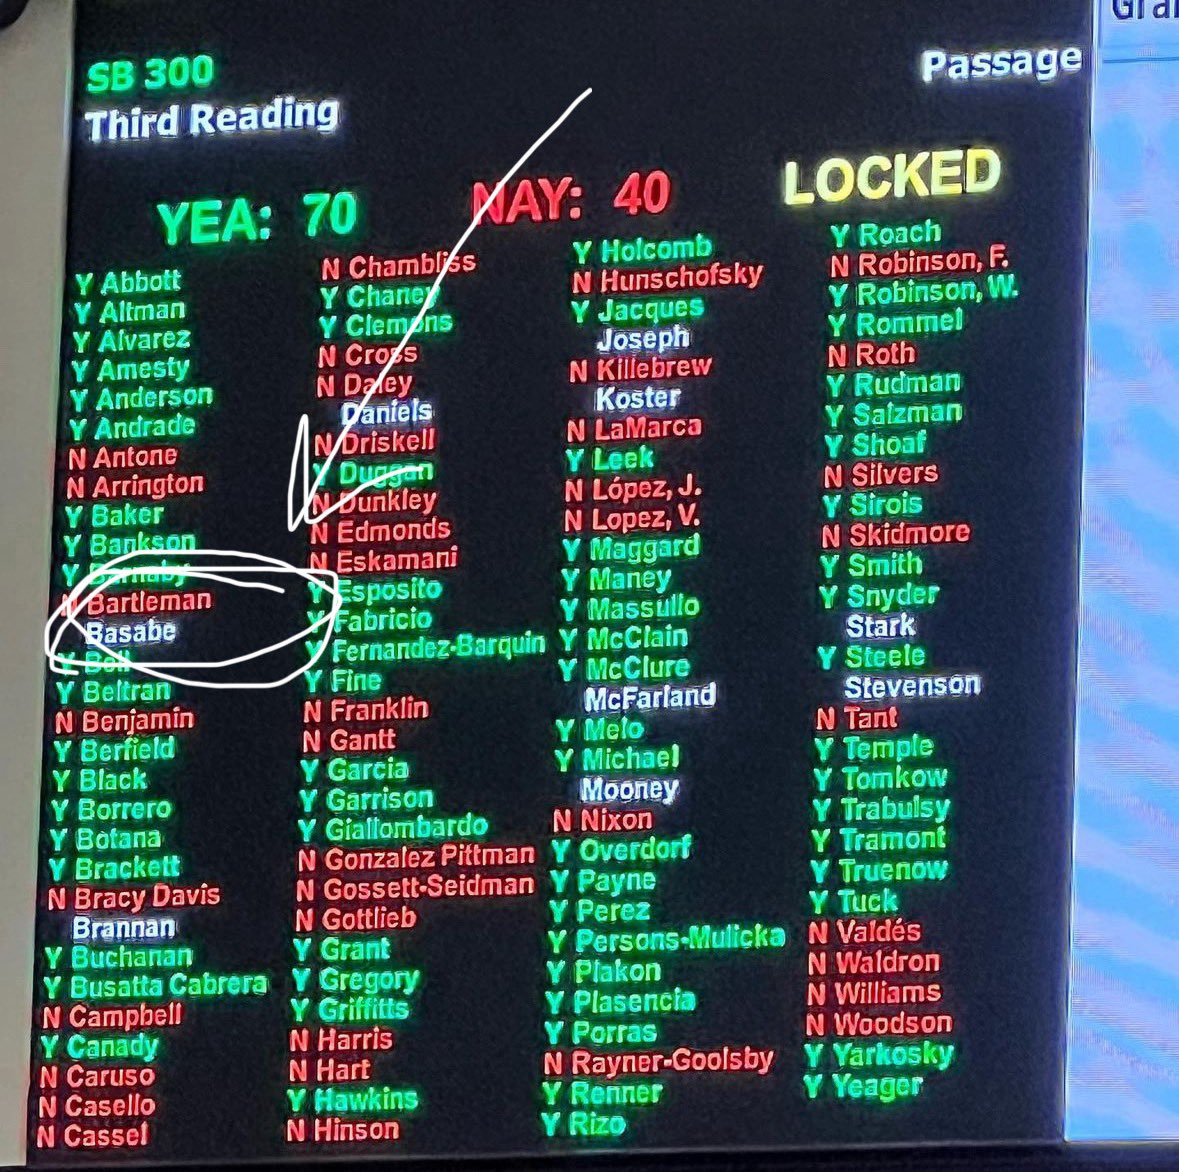 Here is the vote from the 6 week abortion ban in the Florida House that is now in effect. As you can see clearly, @FabianBasabeFL (after voting NO on 52 pro-choice amendments, including exceptions for rape and life of the mother) took the coward’s path and skipped the vote.